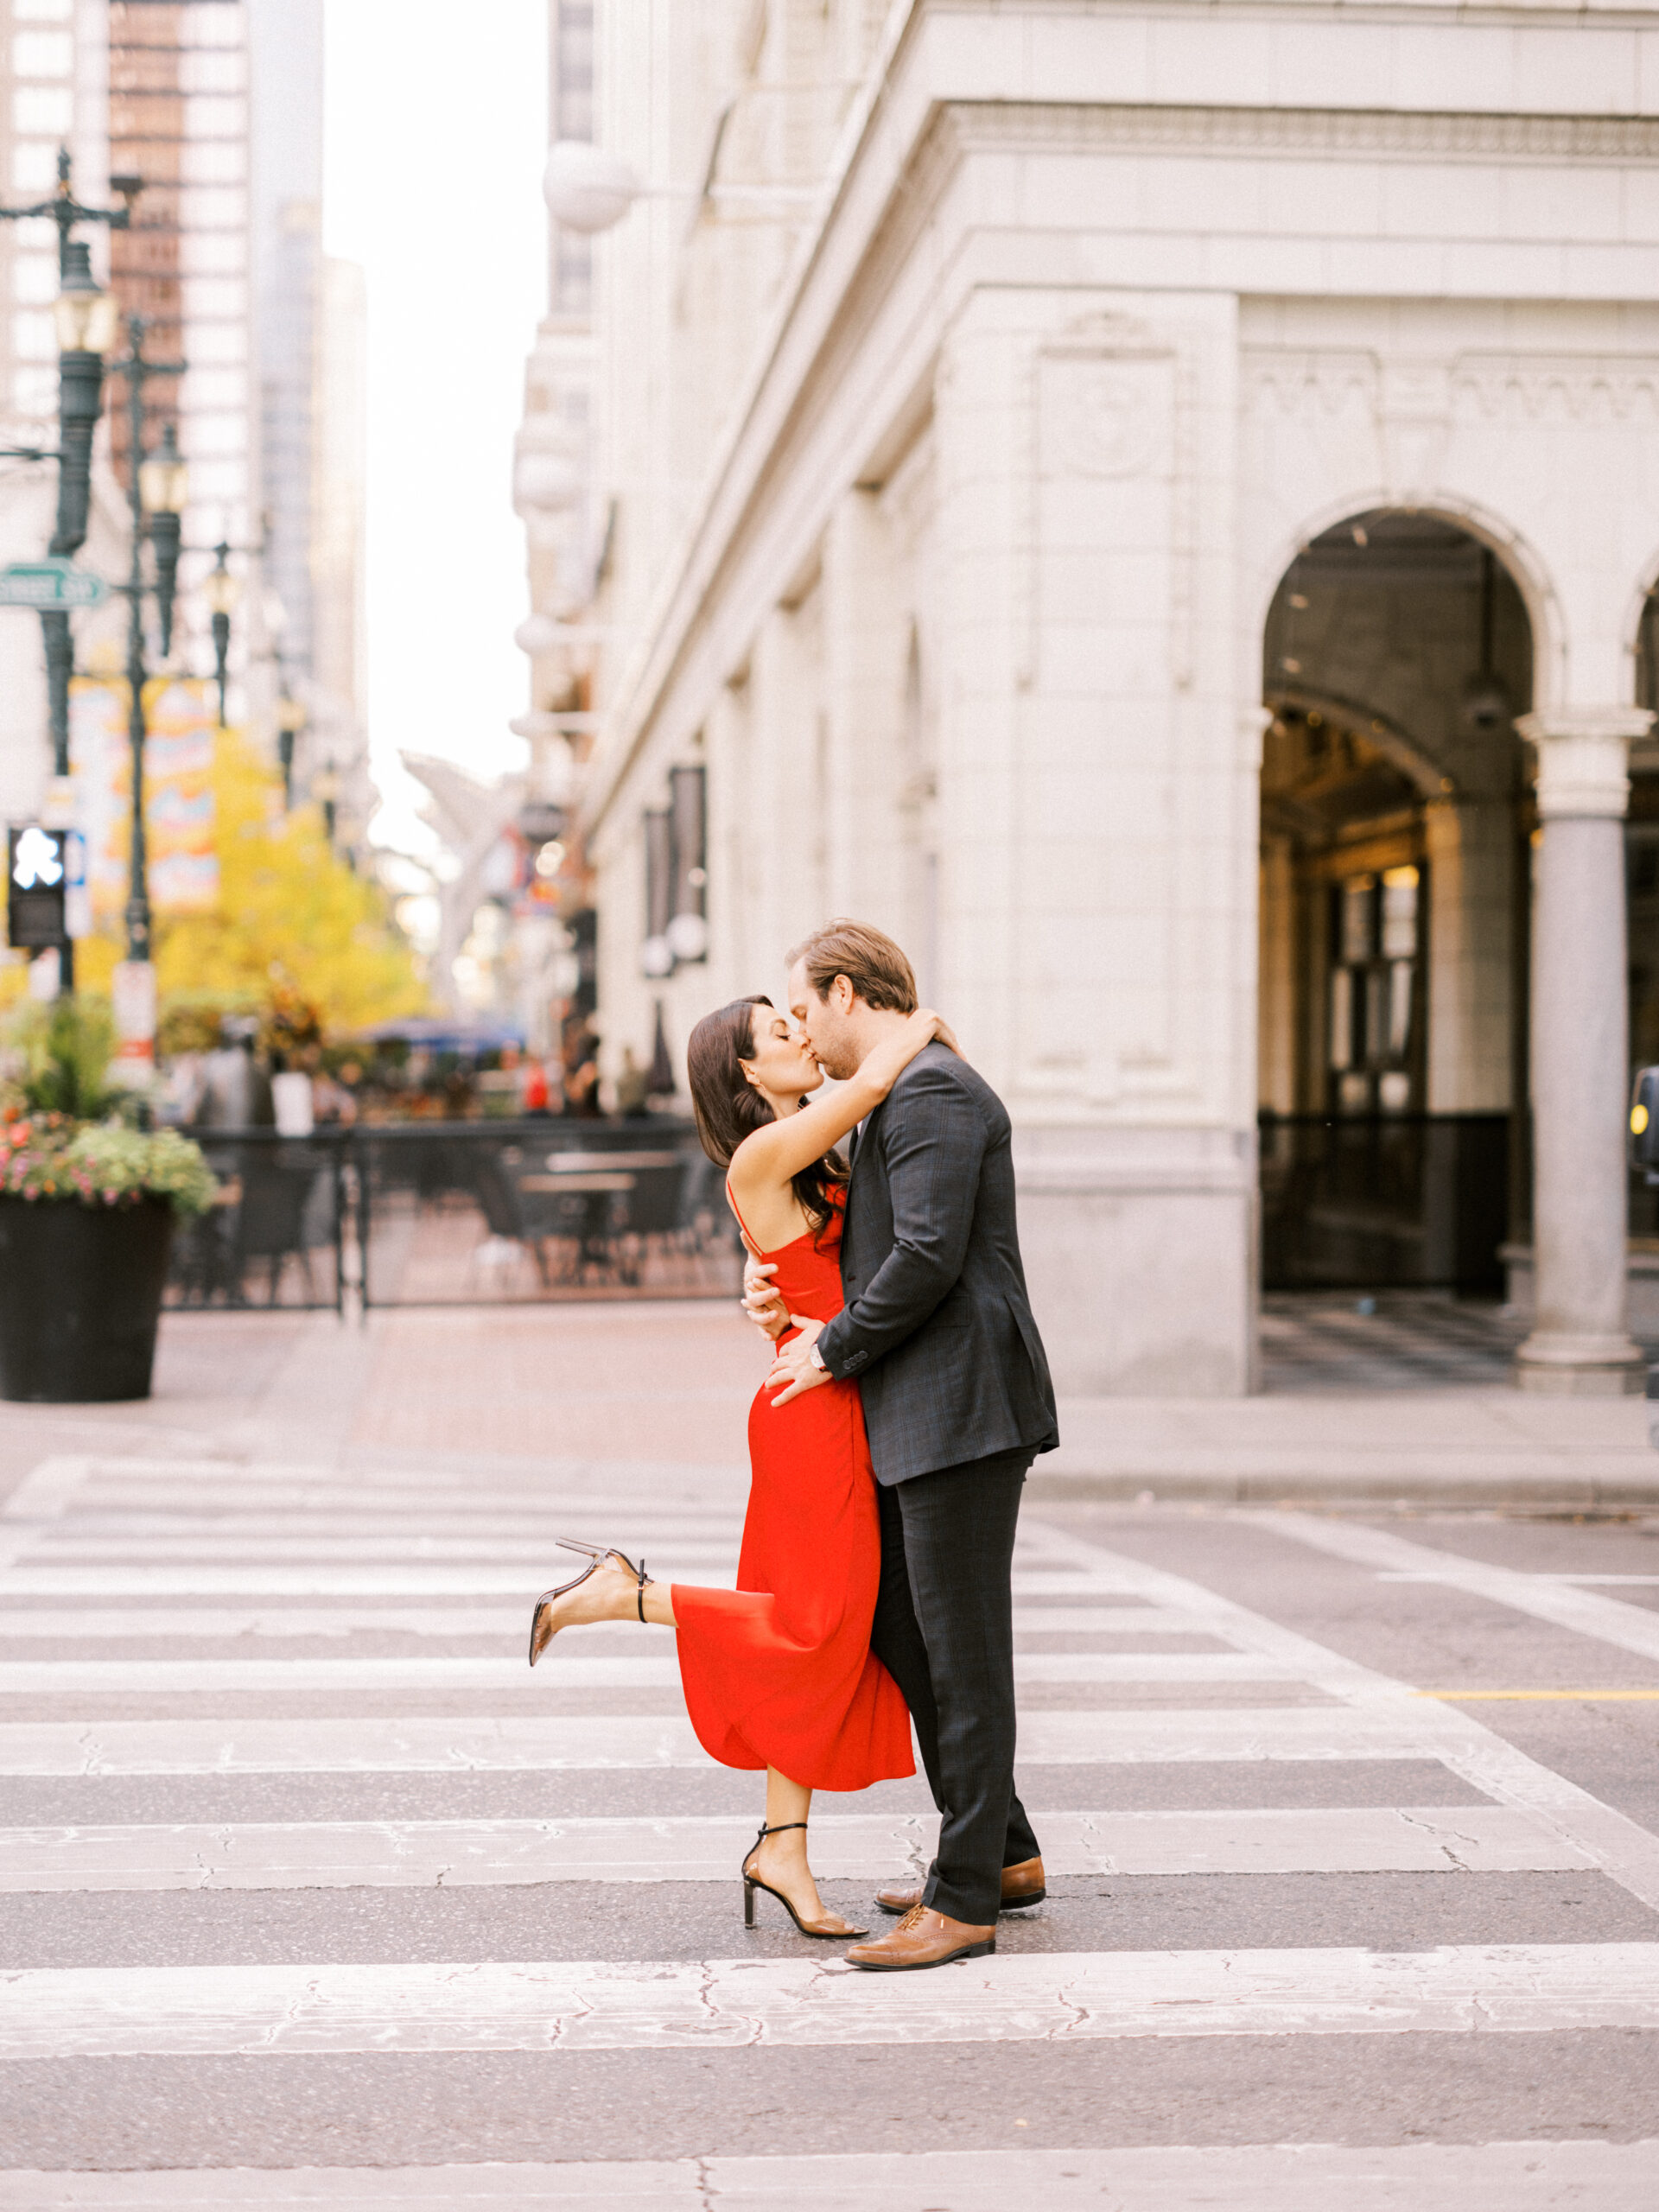 how to plan your engagement session, red dress engagement, urban engagement, sex and the city engagement, engagement photo ideas